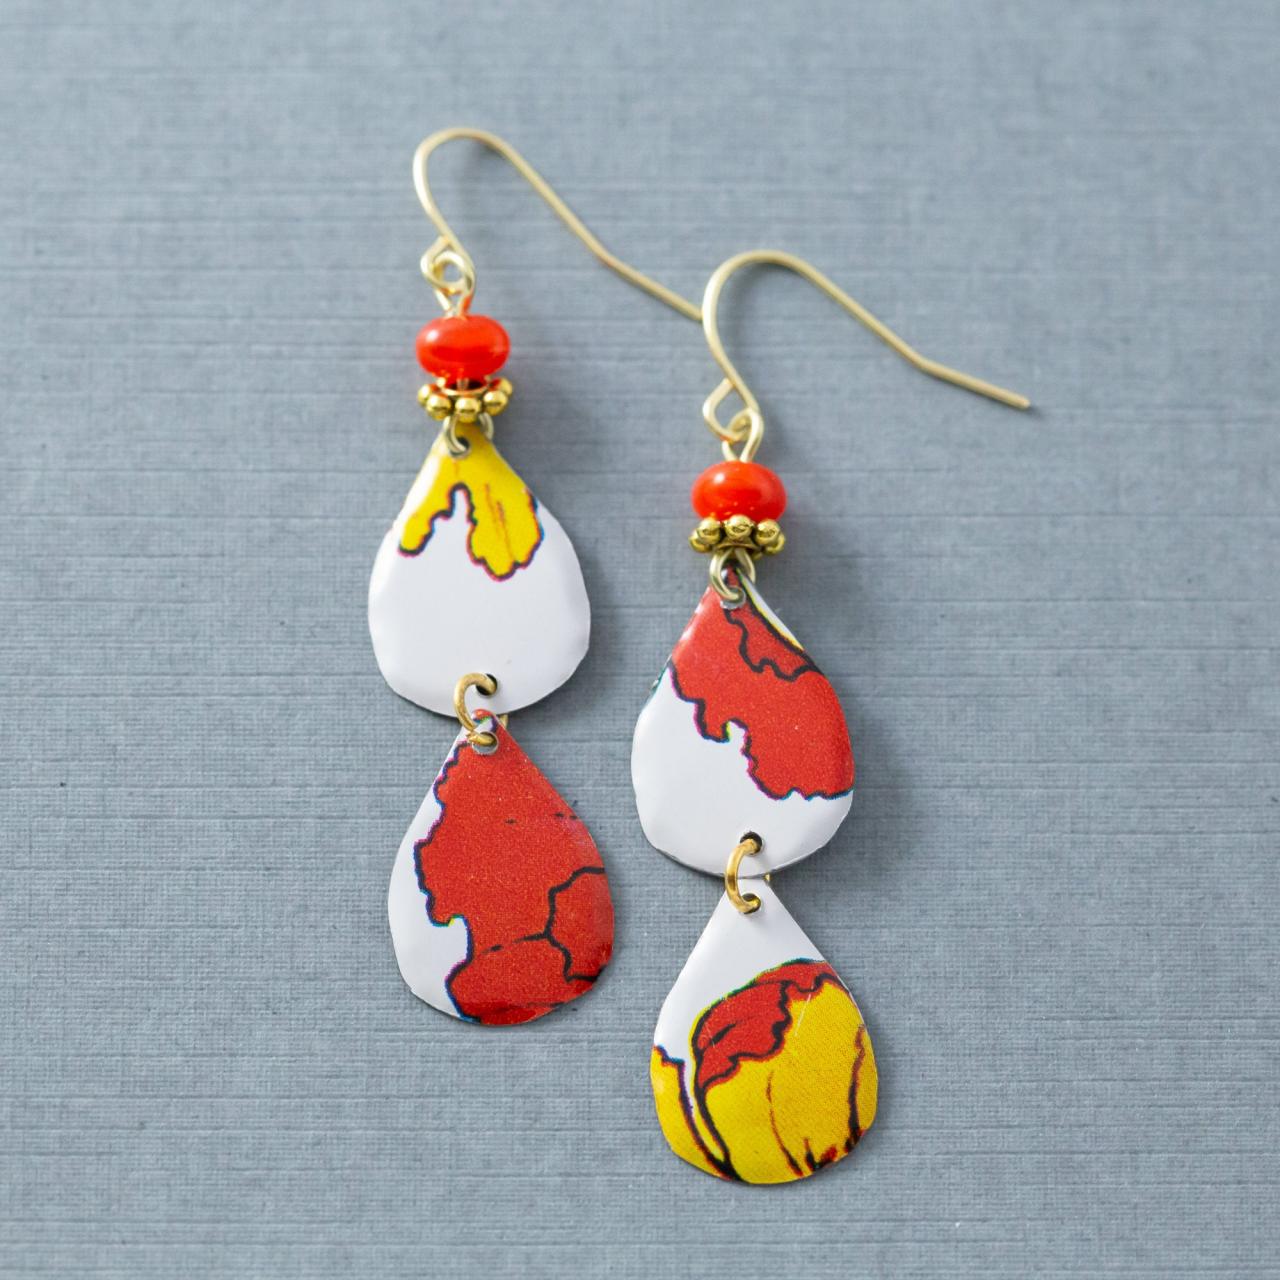 Orange, Red, & Yellow Mismatched Earrings, Abstract Earrings, Boho Teardrop Earrings, Tin Earrings, Bohemian Jewelry